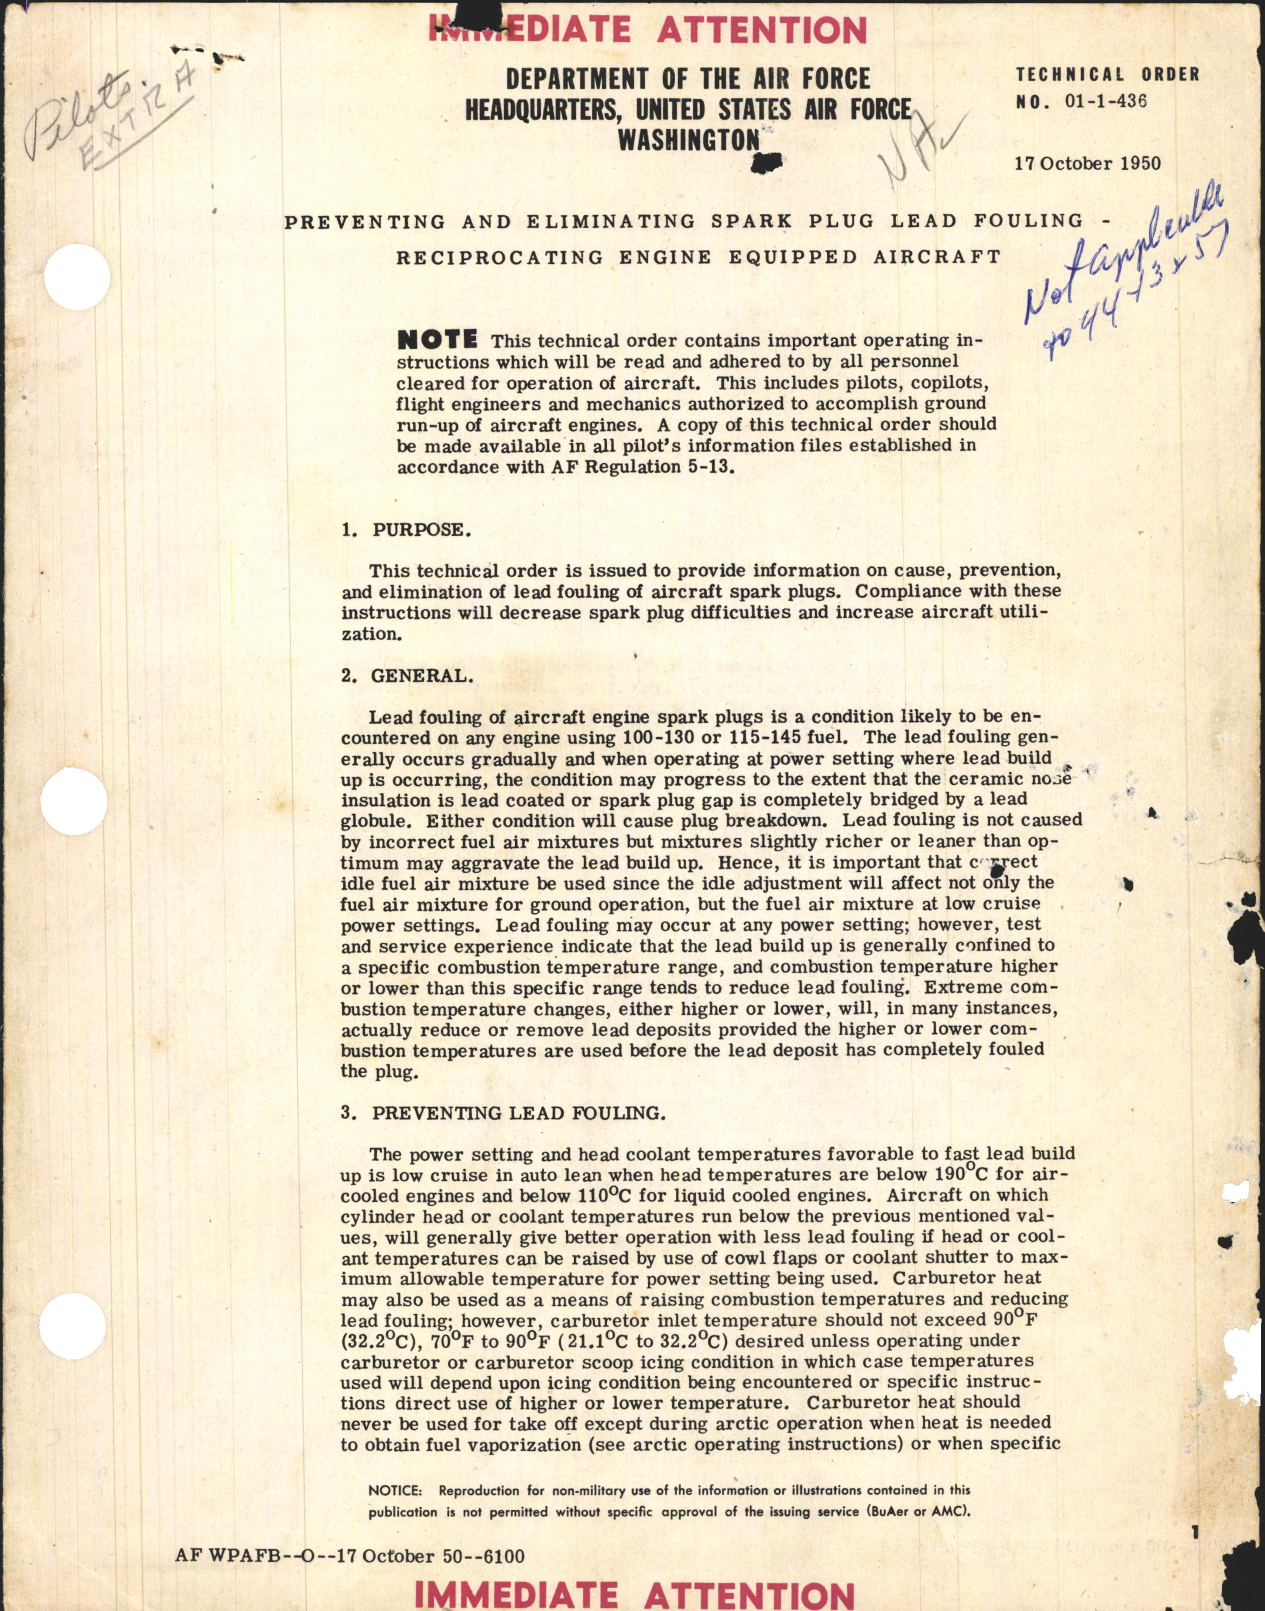 Sample page 1 from AirCorps Library document: Reciprocating Engine Equipped Aircraft; Preventing and Eliminating Spark Plug Lead Fouling